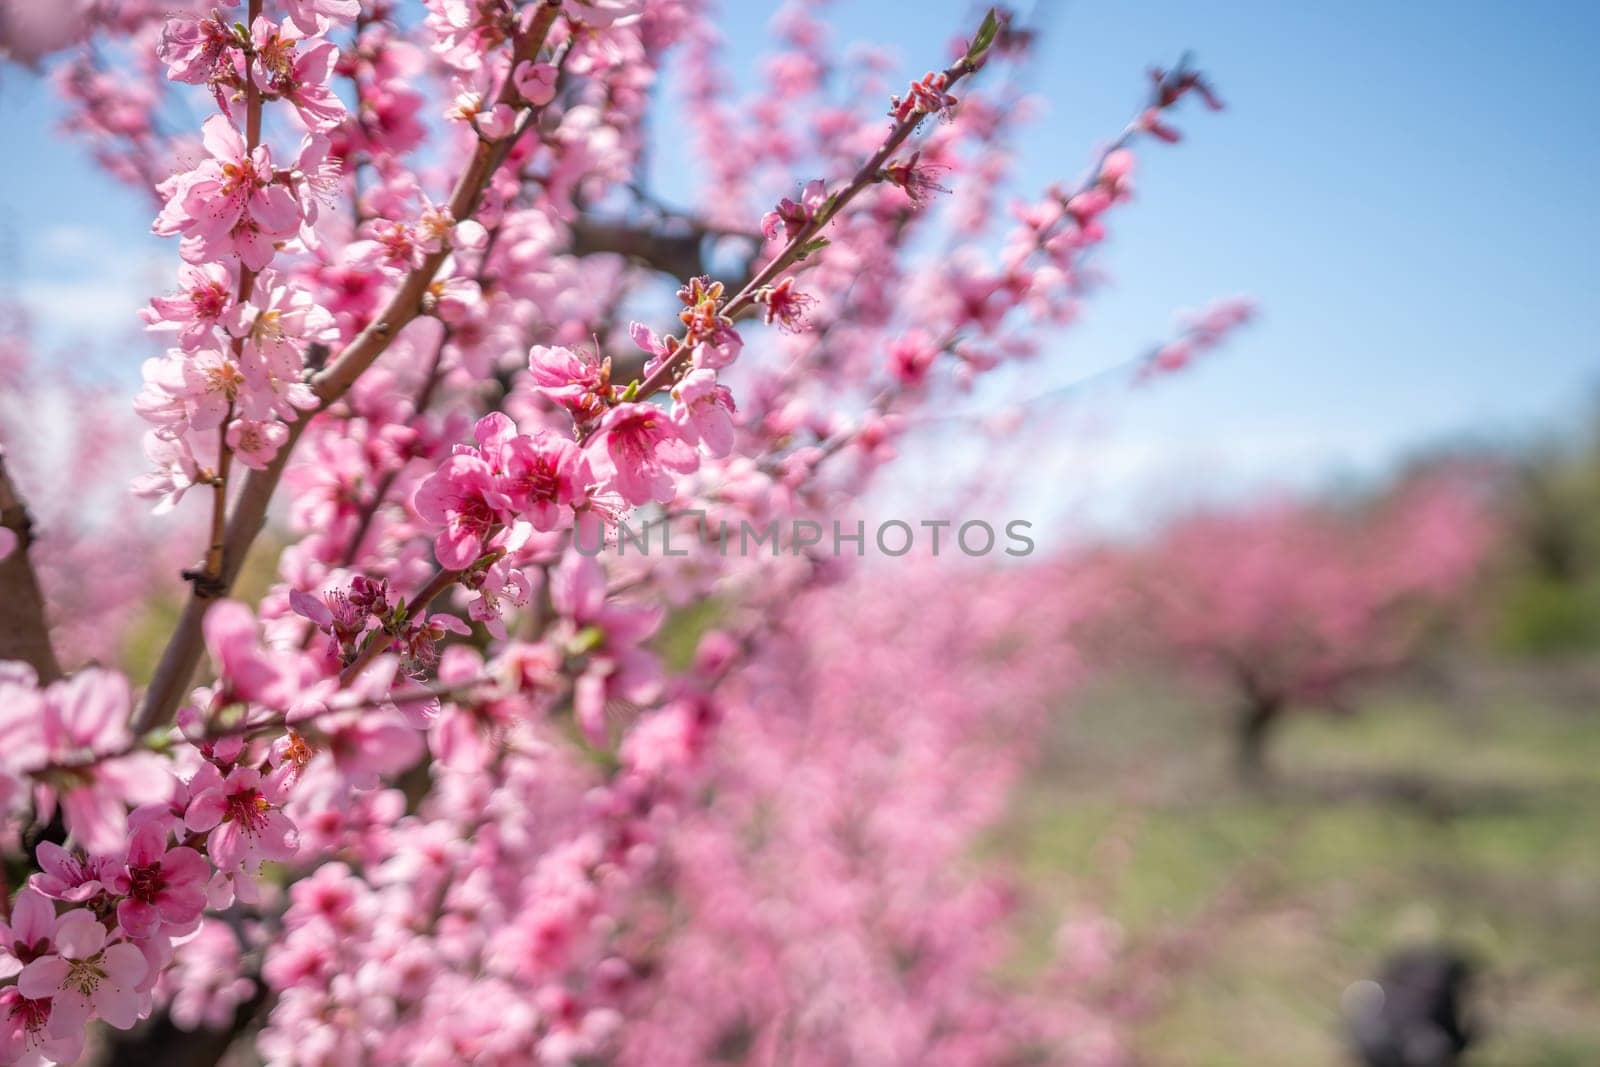 peach tree with pink flowers is in full bloom. The flowers are large and bright, and they are scattered throughout the tree. The tree is surrounded by a field, and the sky is clear and blue. by Matiunina